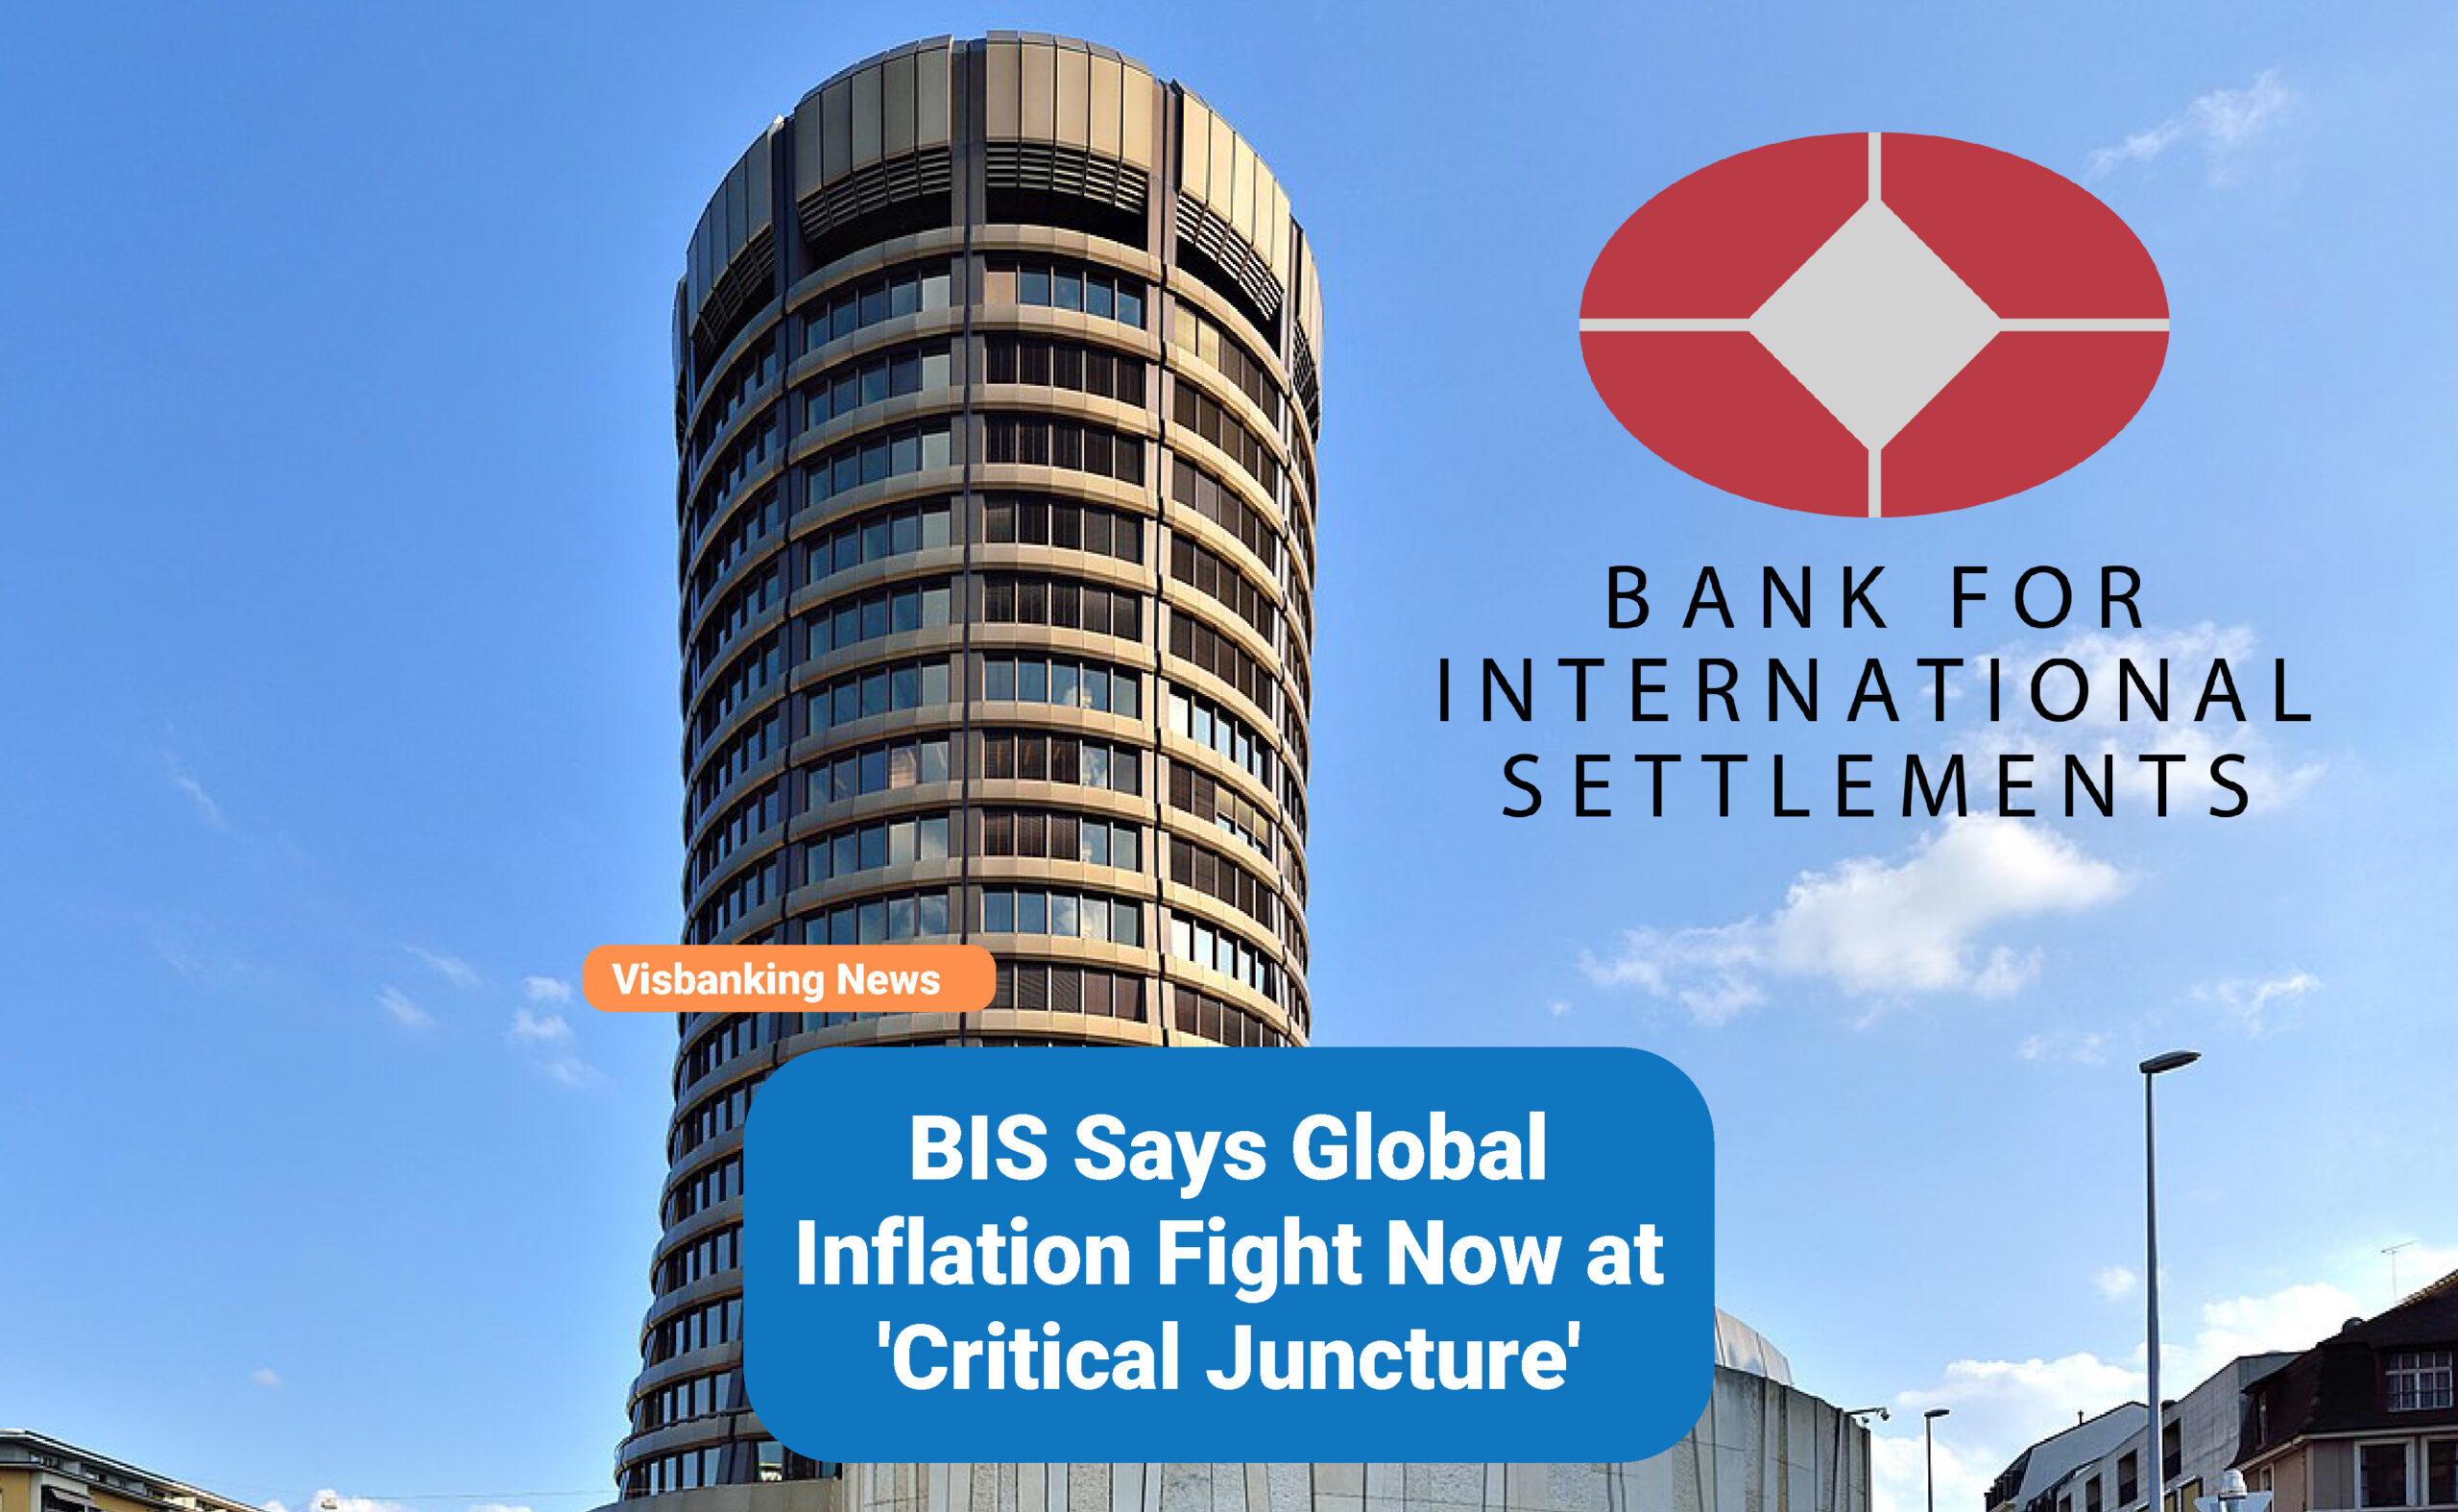 BIS Says Global Inflation Fight Now at ‘Critical Juncture’